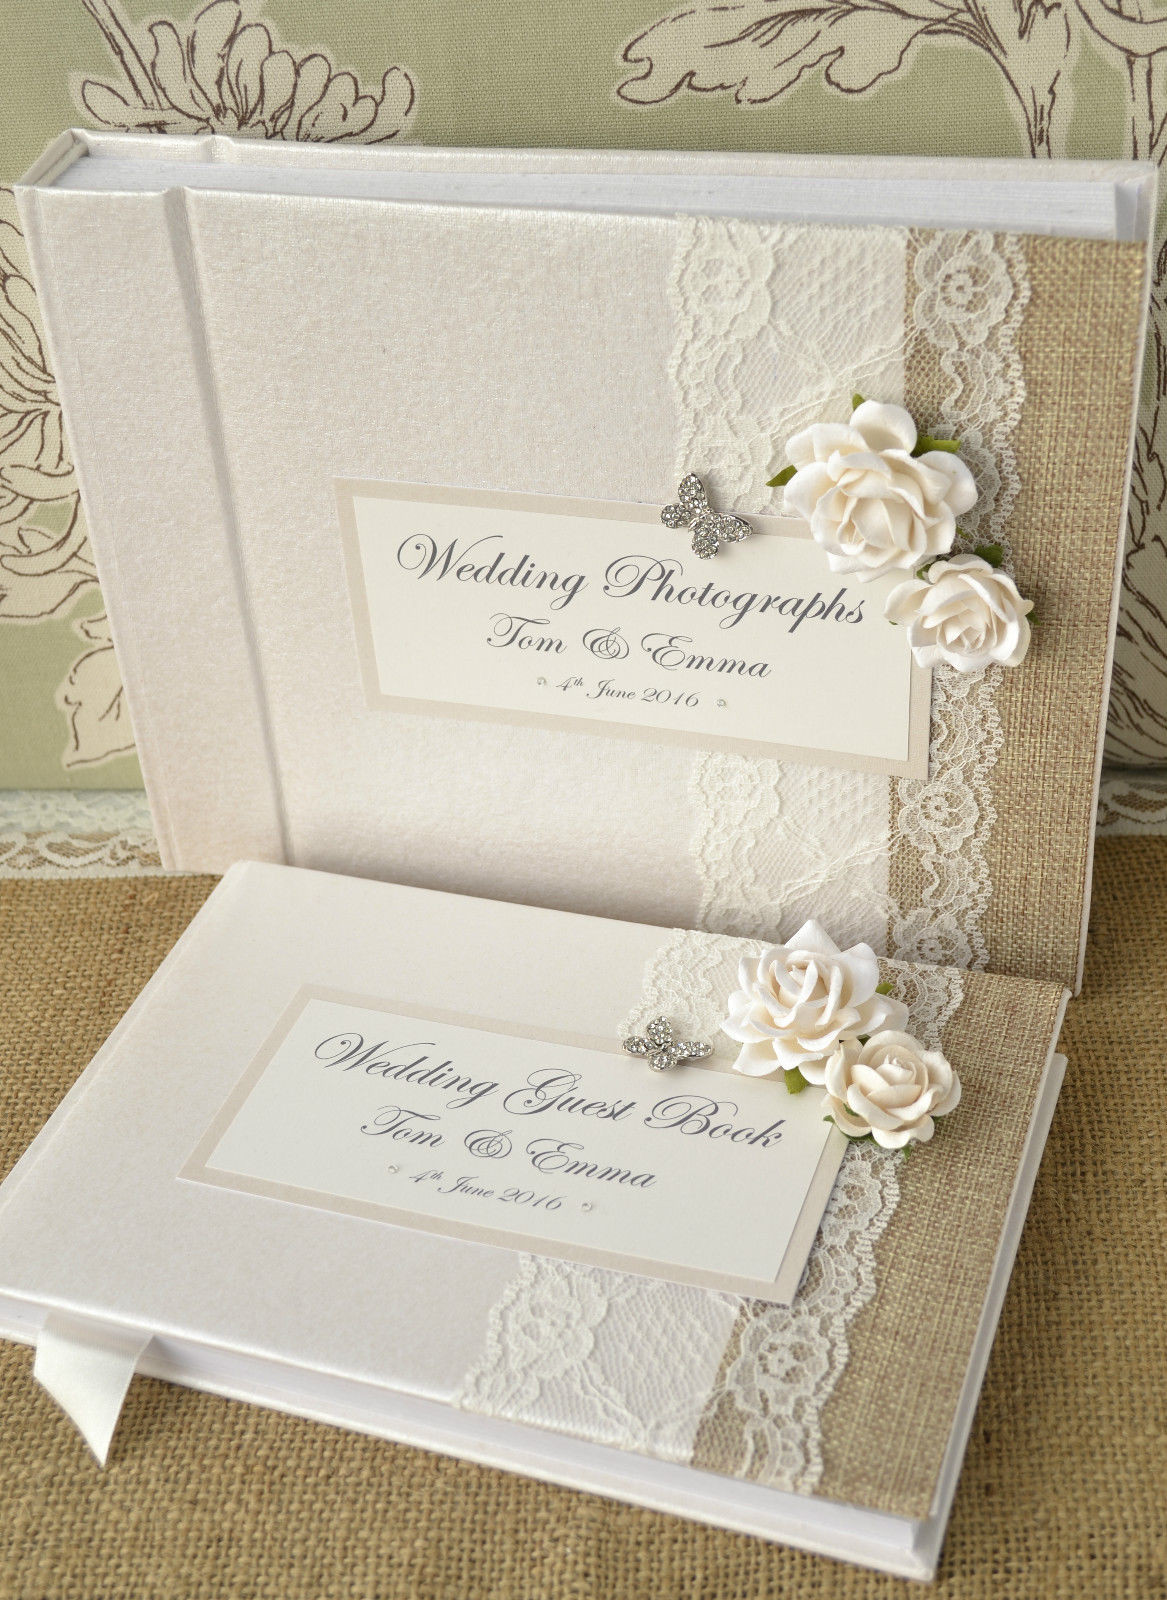 Wedding Guests Book
 Luxury Personalised Wedding Guest Book & Album Set Lace